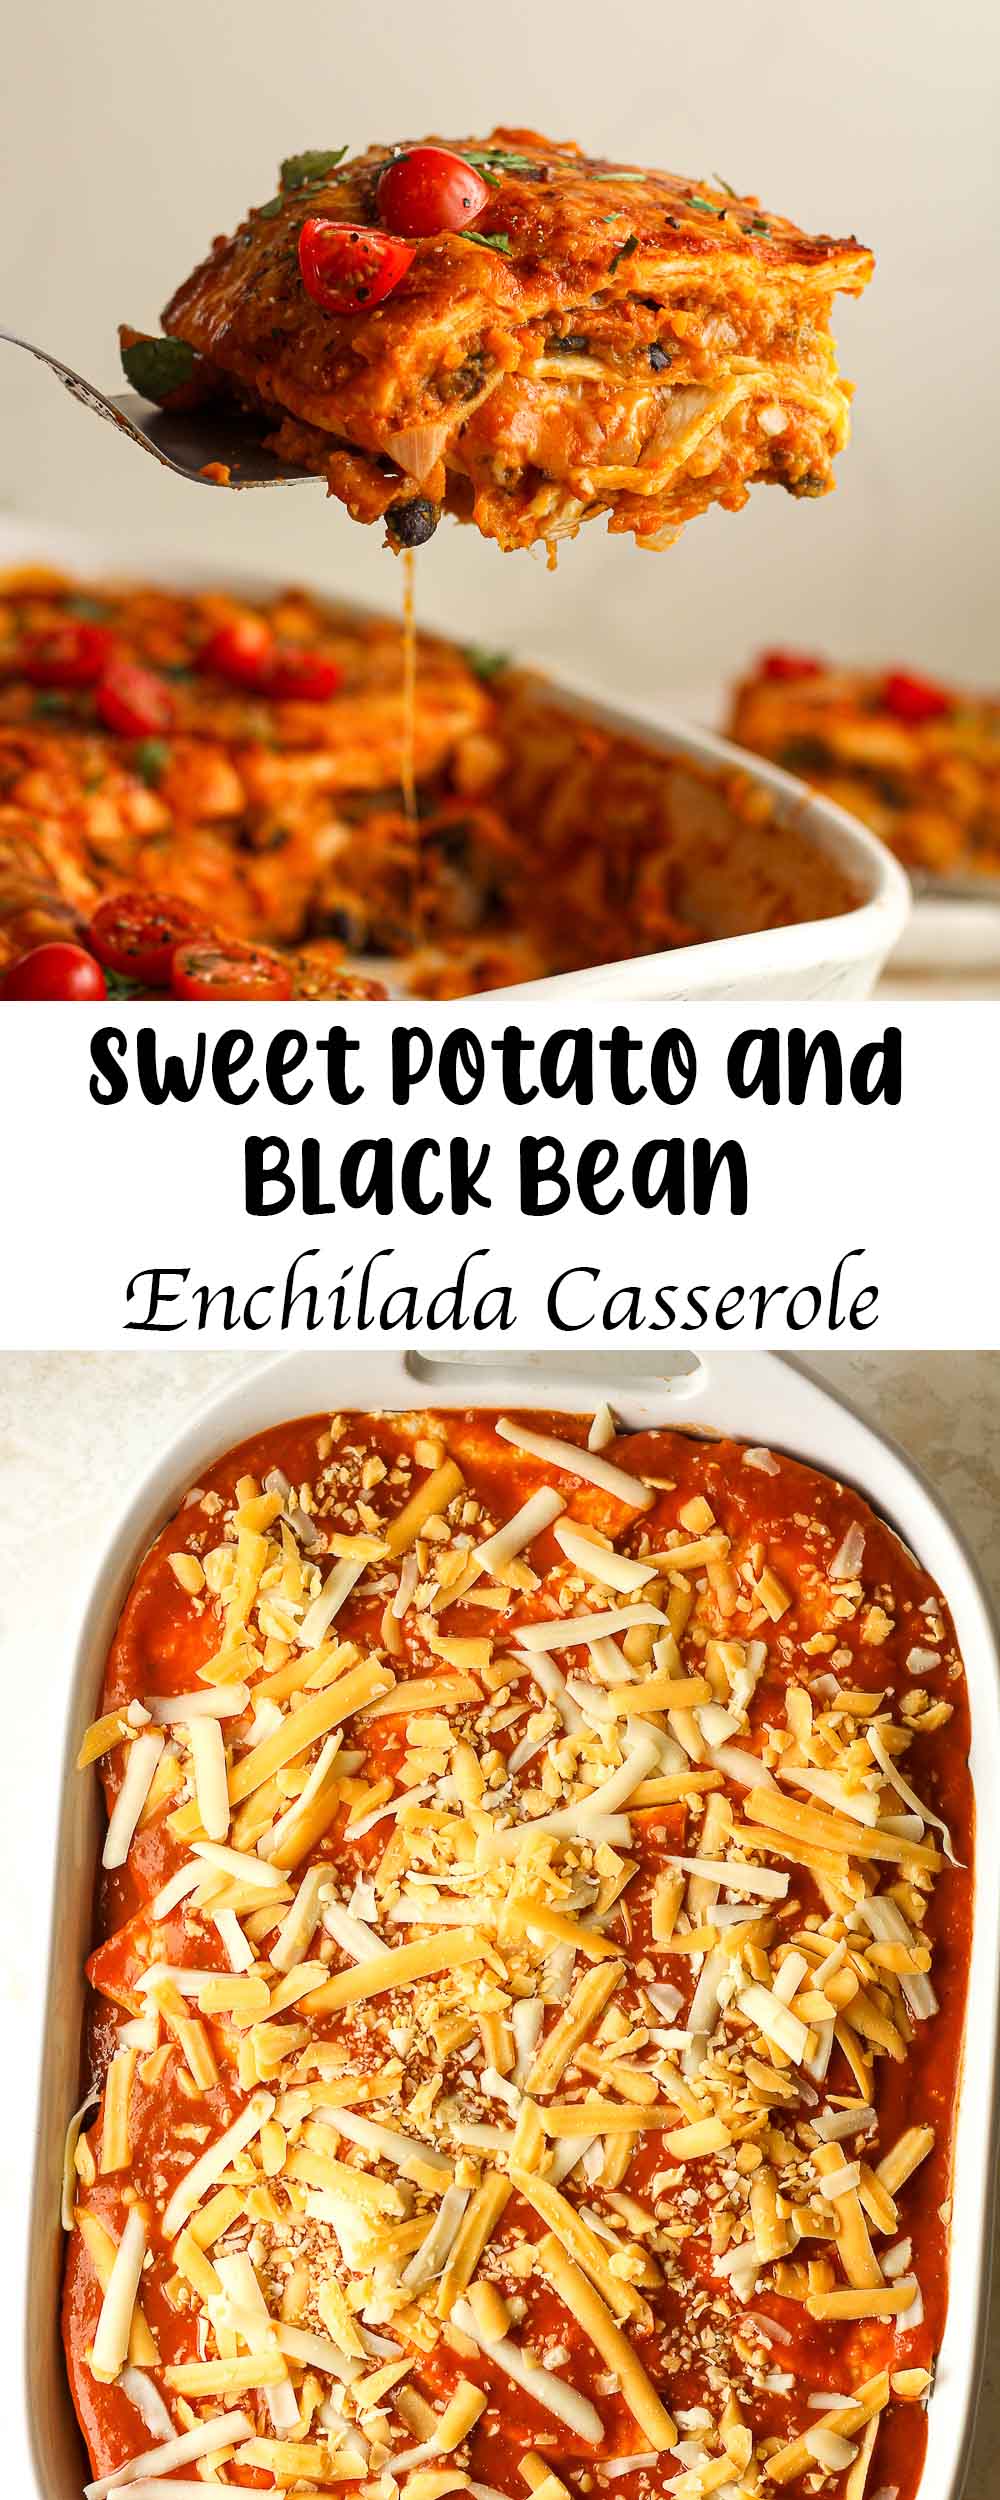 A collage of photos for sweet potato and black bean enchilada casserole.